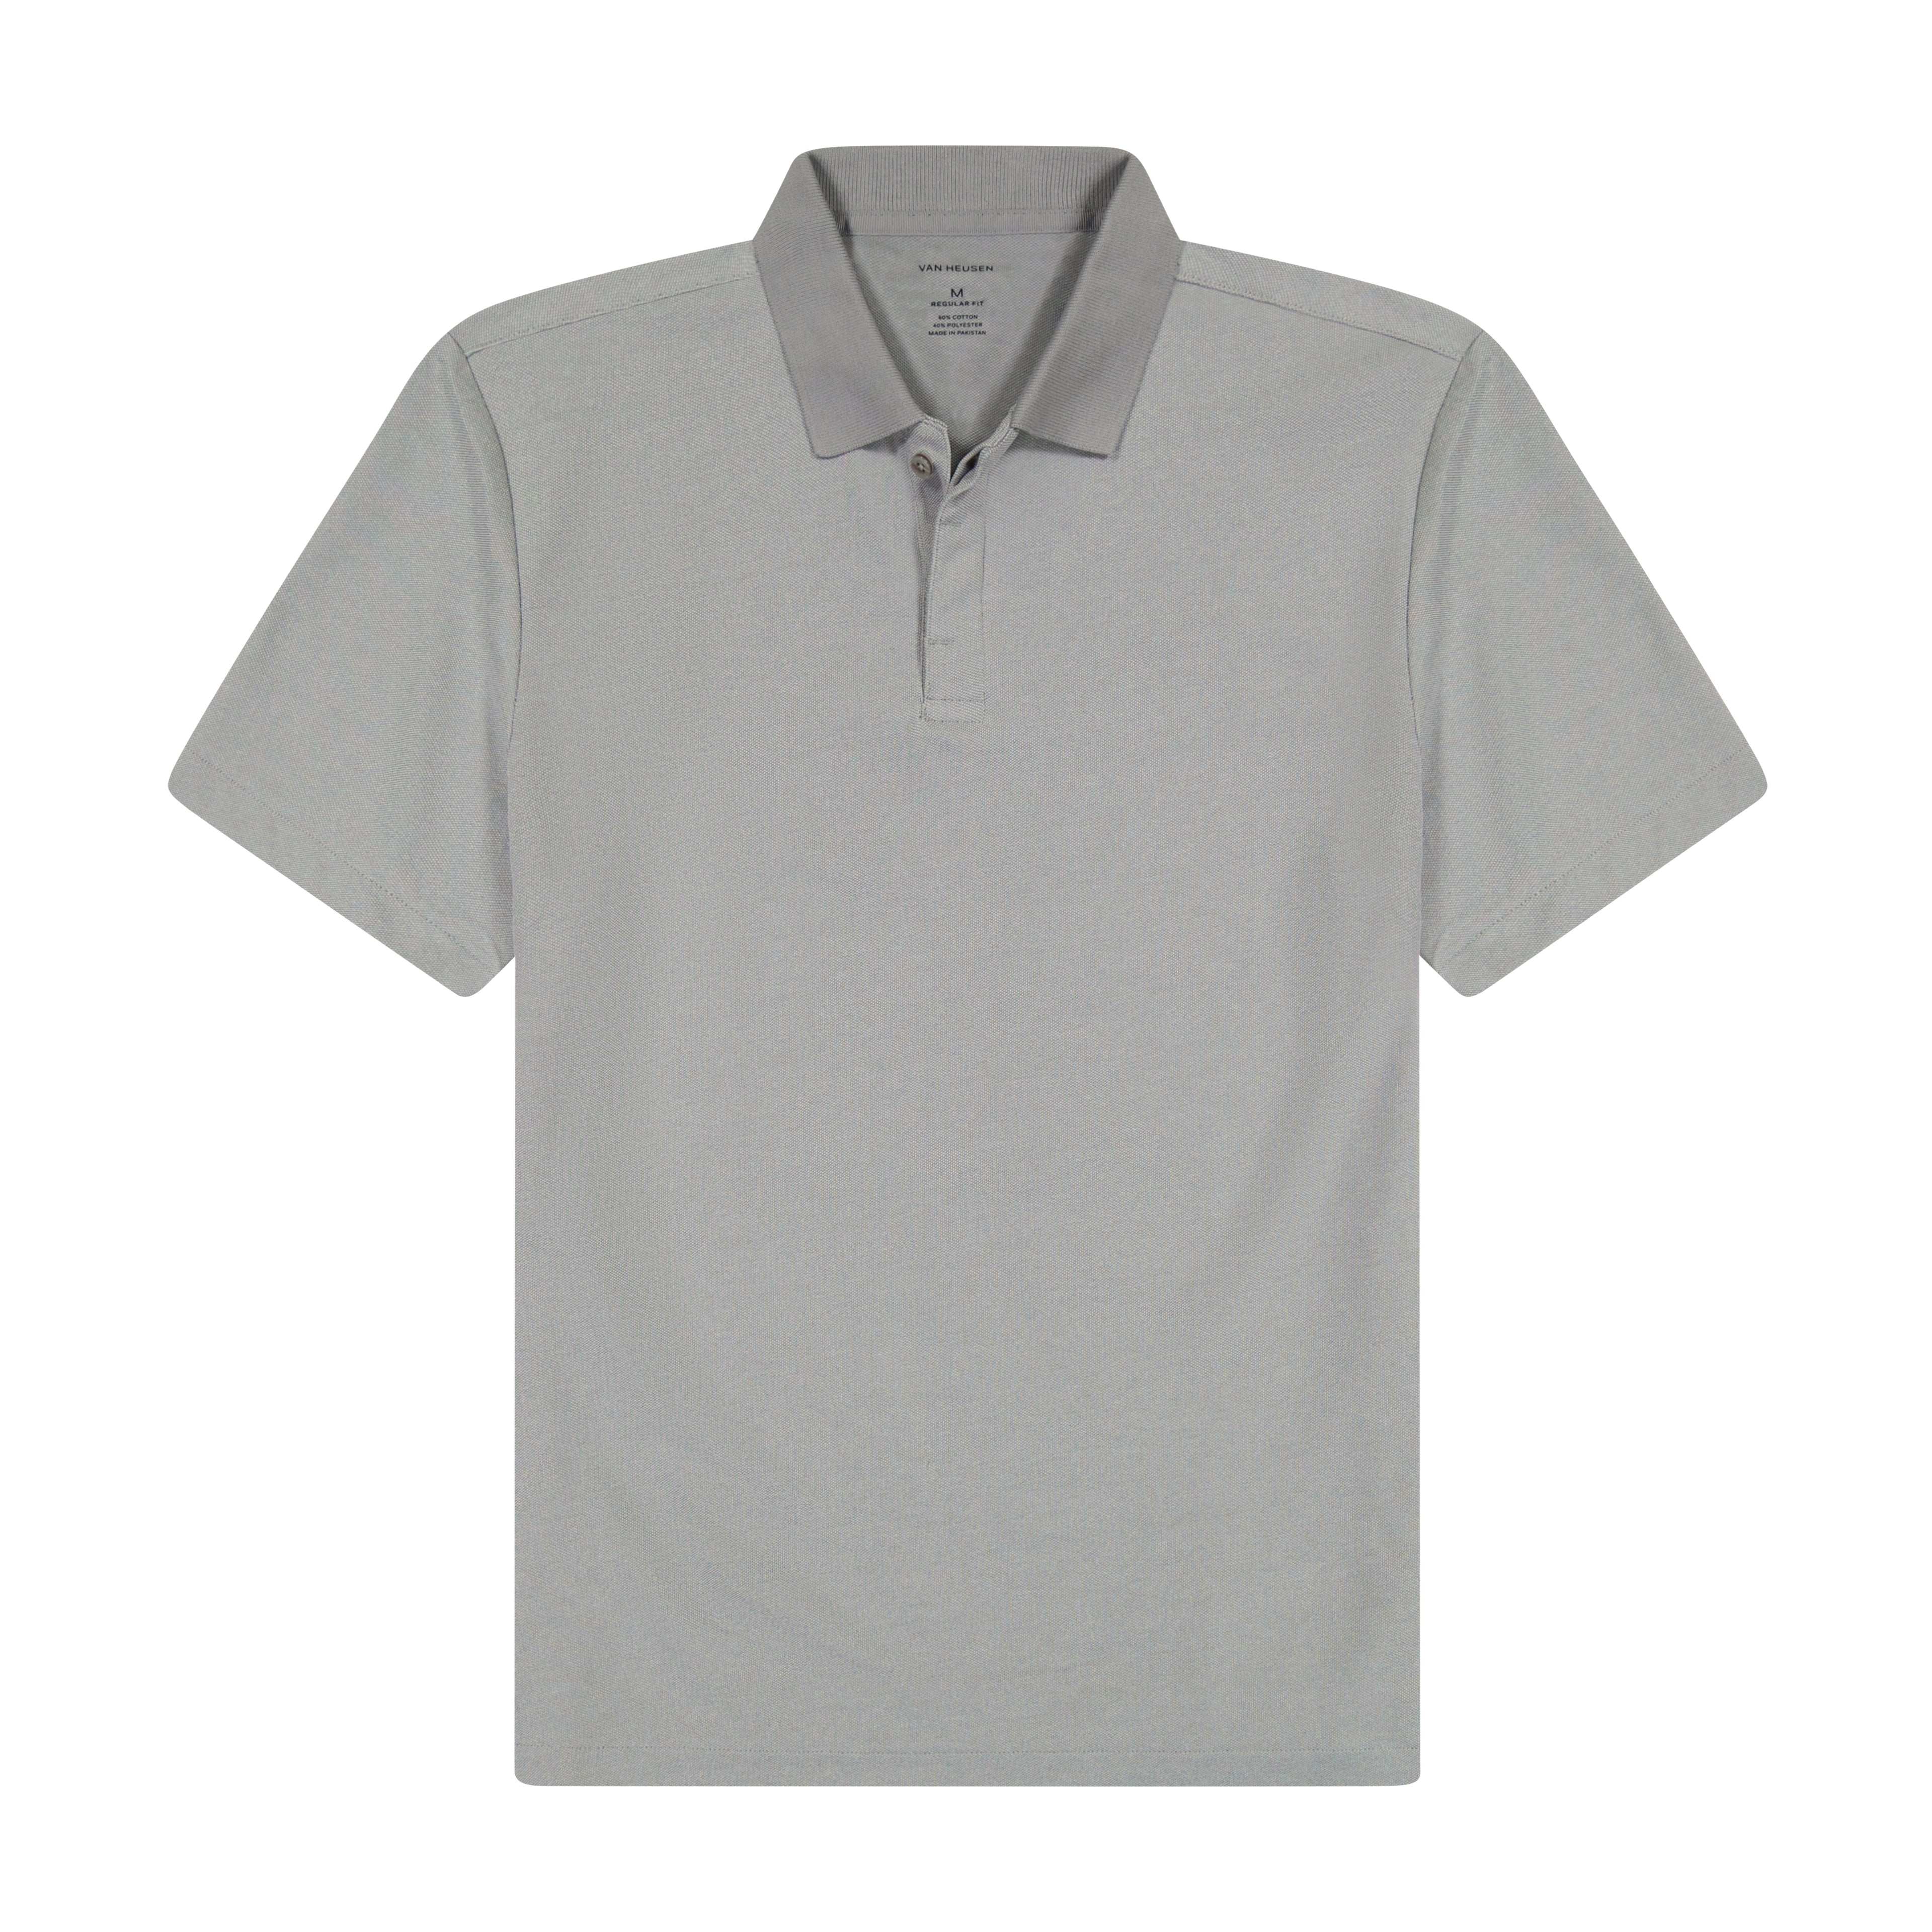 Essential Stain Shield Honeycomb Pique Polo